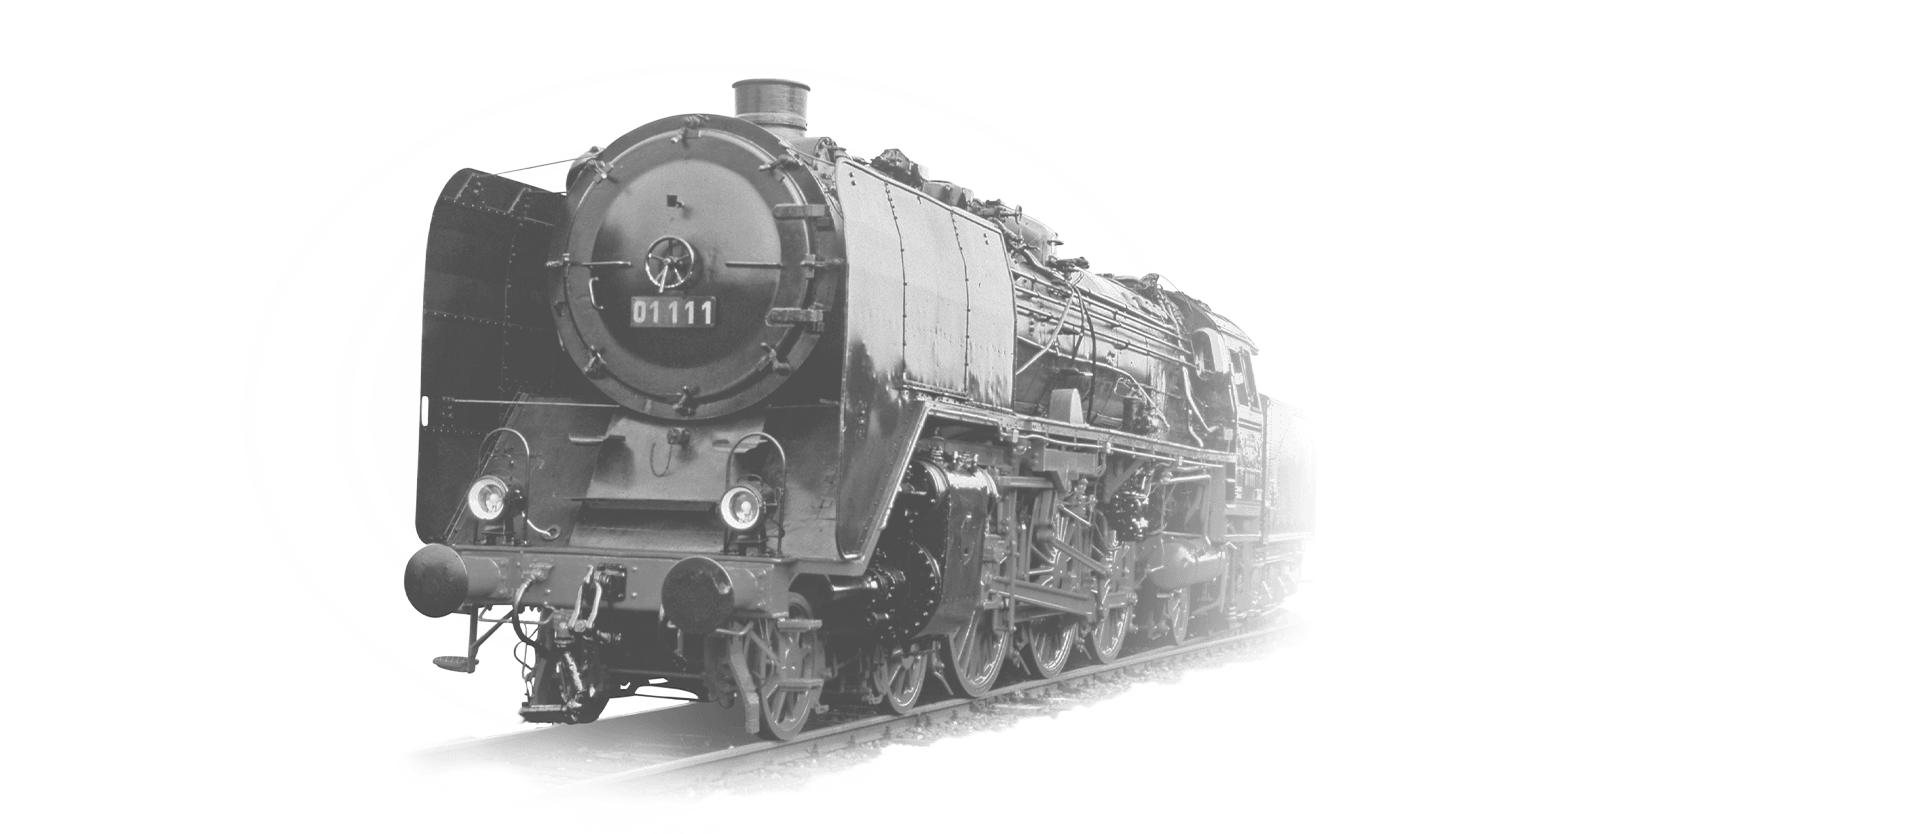 The locomotive 01-111 is going towards the camera in black and white